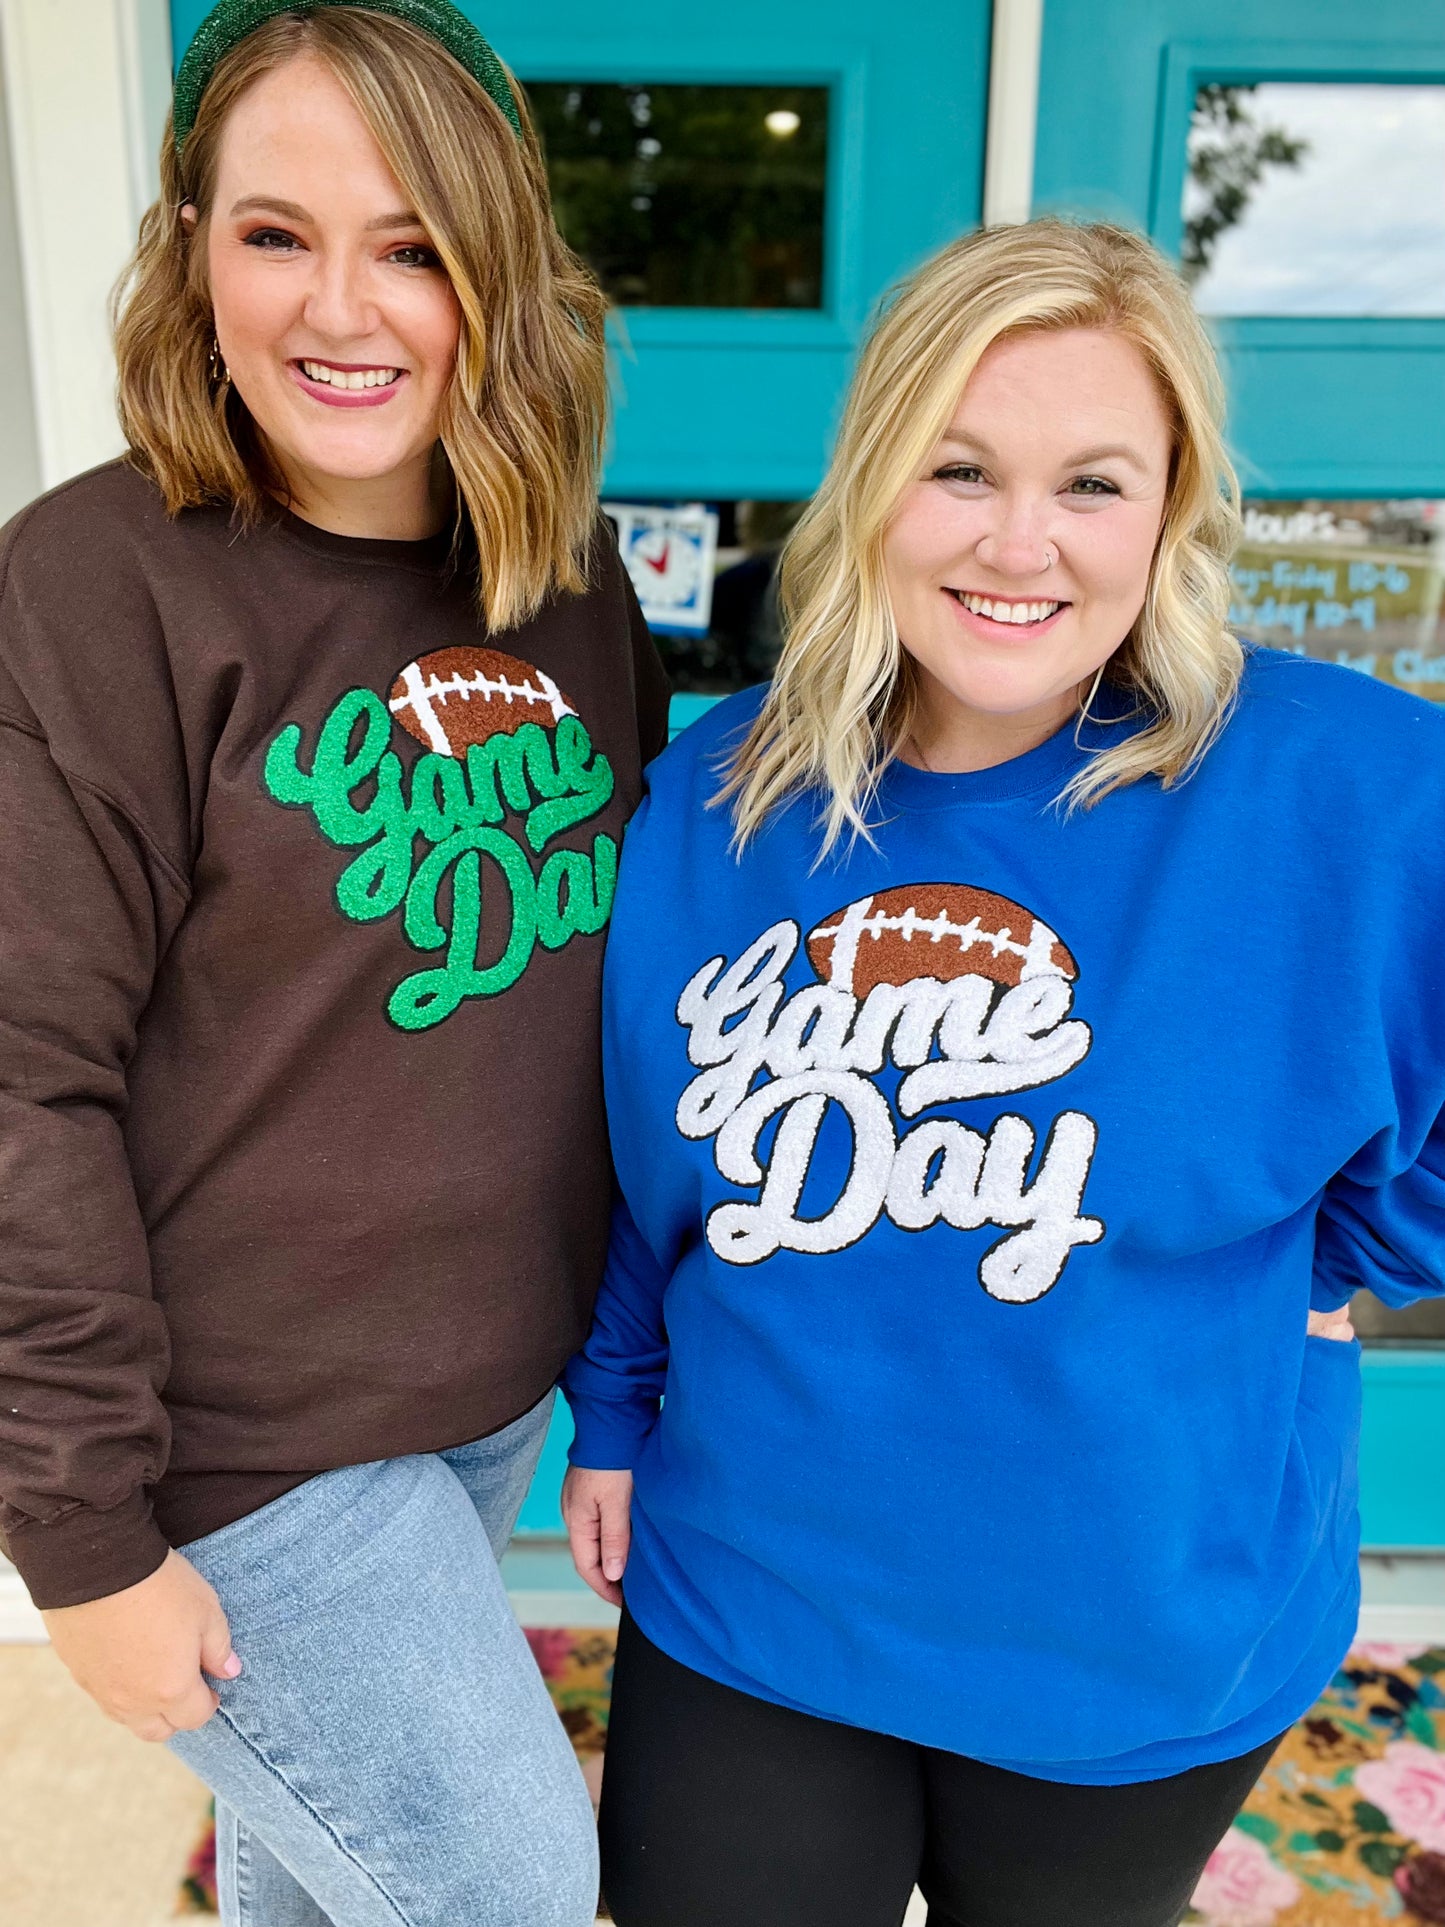 Game Day Chenille Patch Sweatshirt (Any Color!)